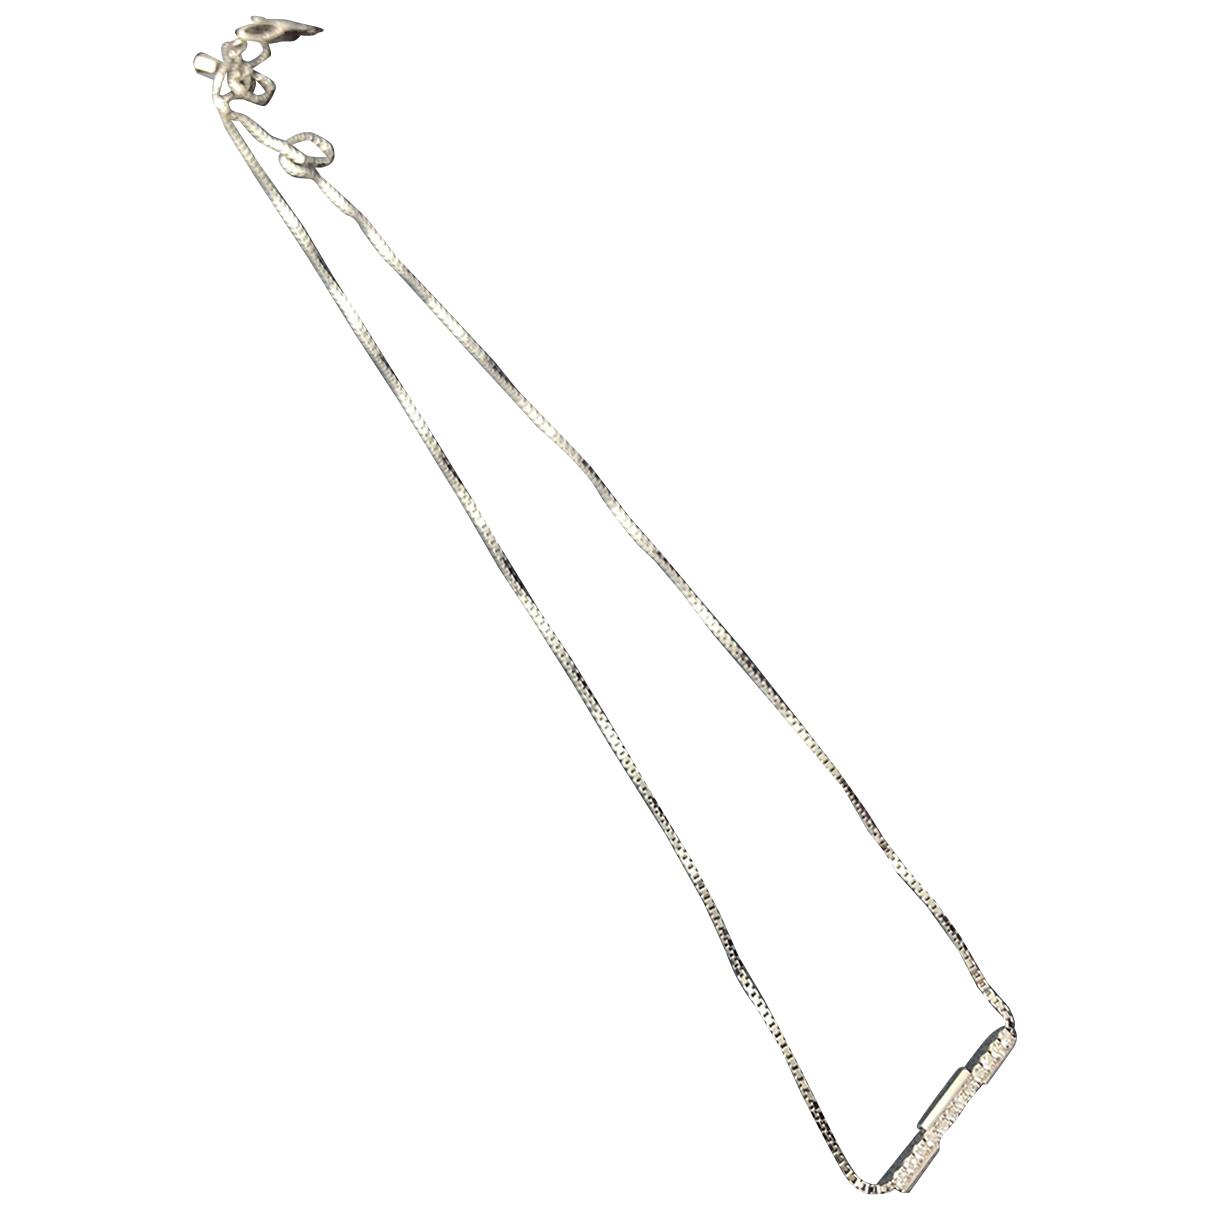 Gucci Link To Love white gold necklace